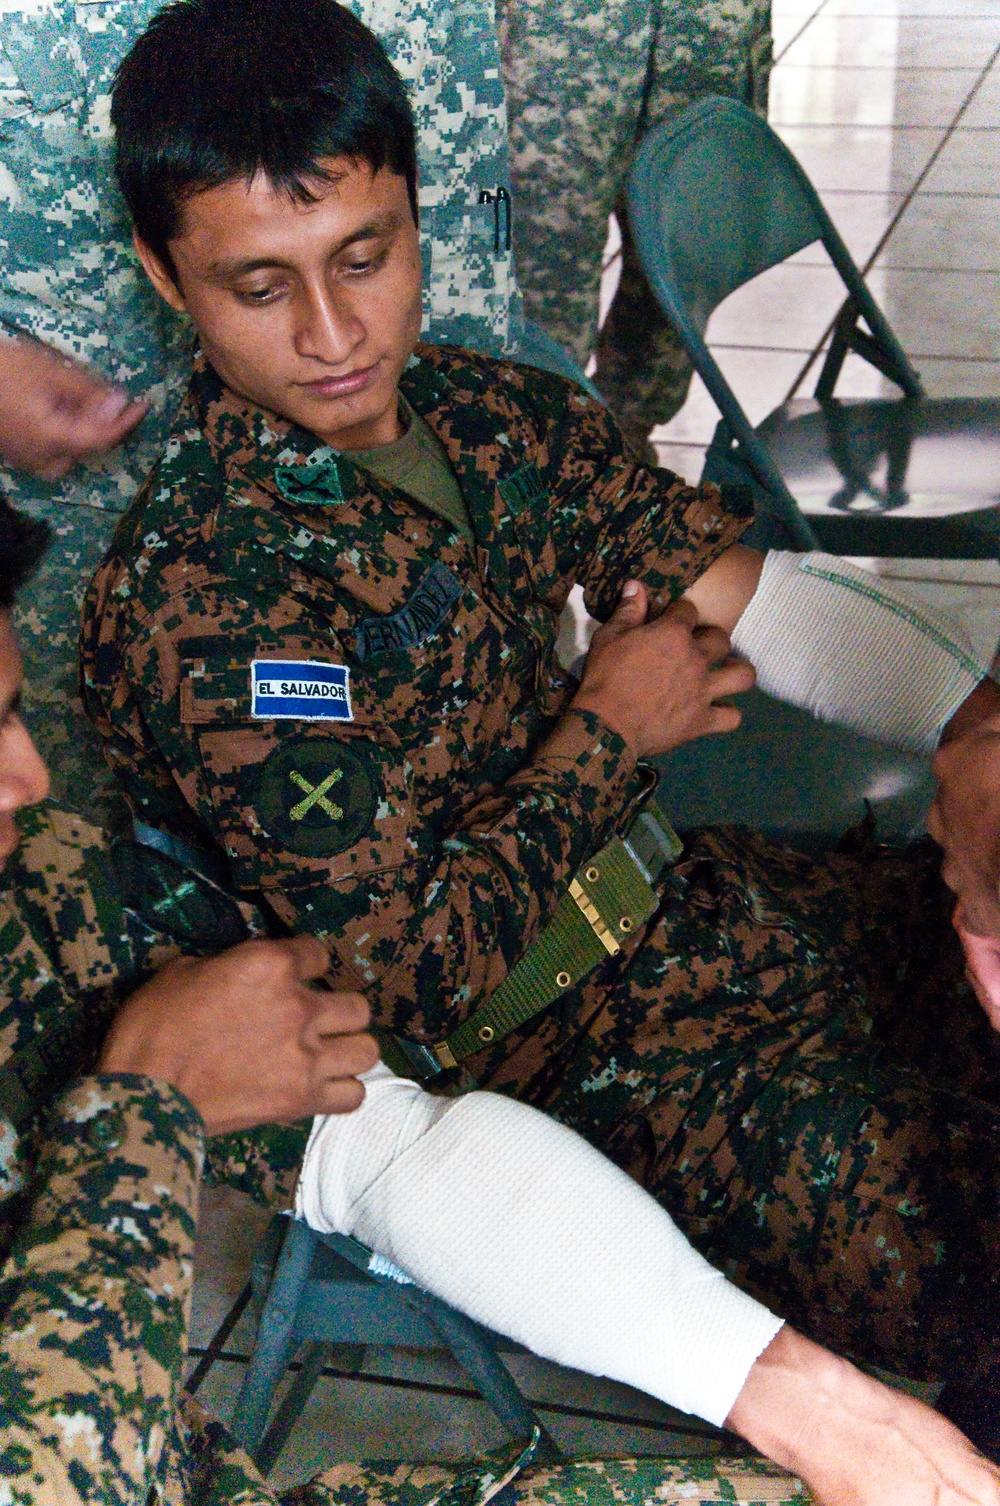 Salvadoran soldier learns first aid